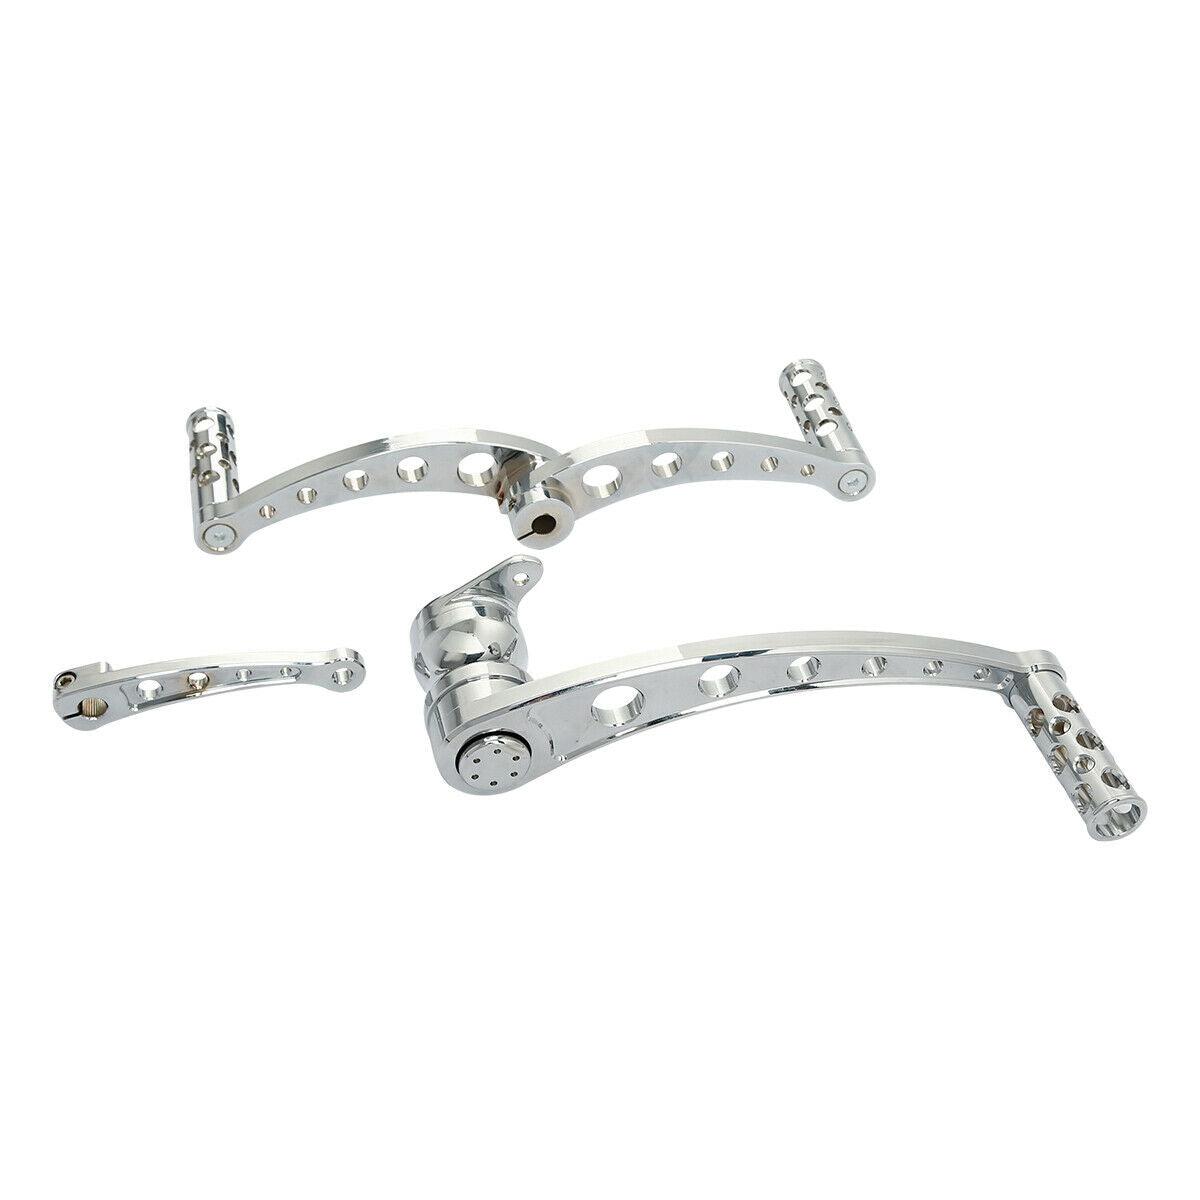 Chrome Brake Arm Heel Toe Shifter Set Fit For Harley Touring Road King Softail - Moto Life Products